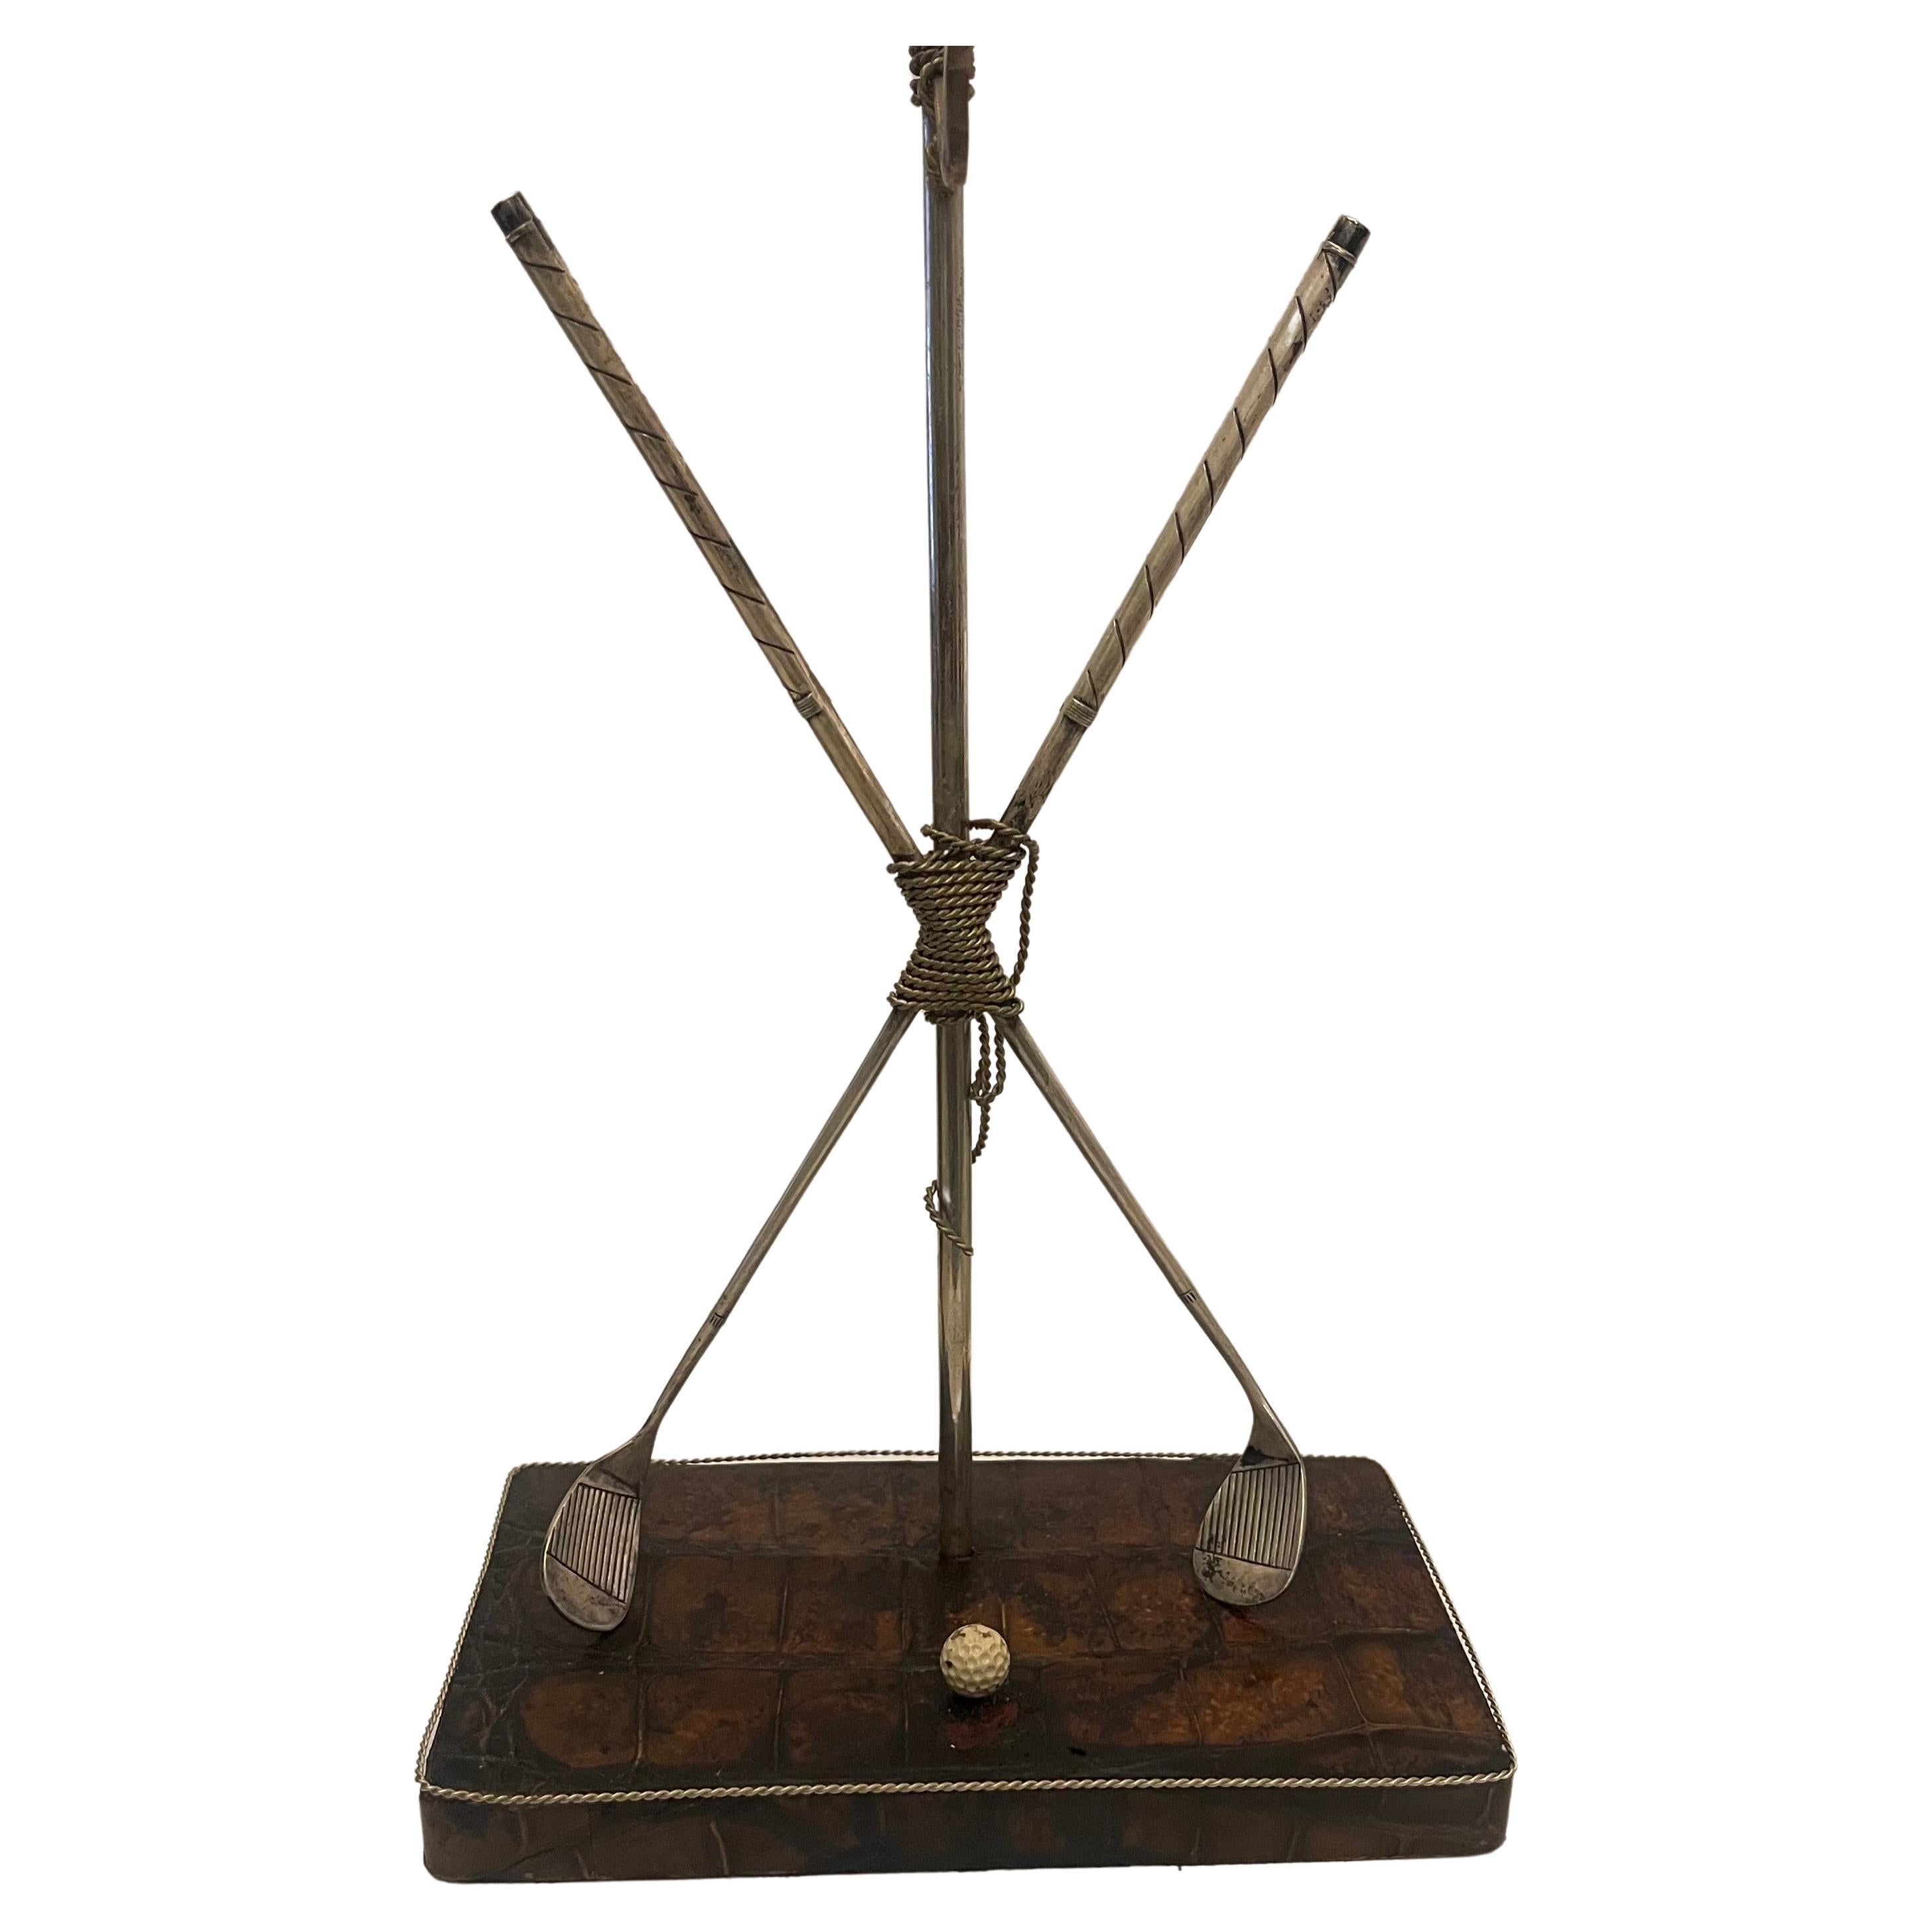 A Wonderful Alvin Silver Plated Pocket Watch Stand Made Up Of Cross Golf Clubs Against A Flag Pole Resting On A Crocodile Base
Stamped Alvin On The Bottom Of Each Club.